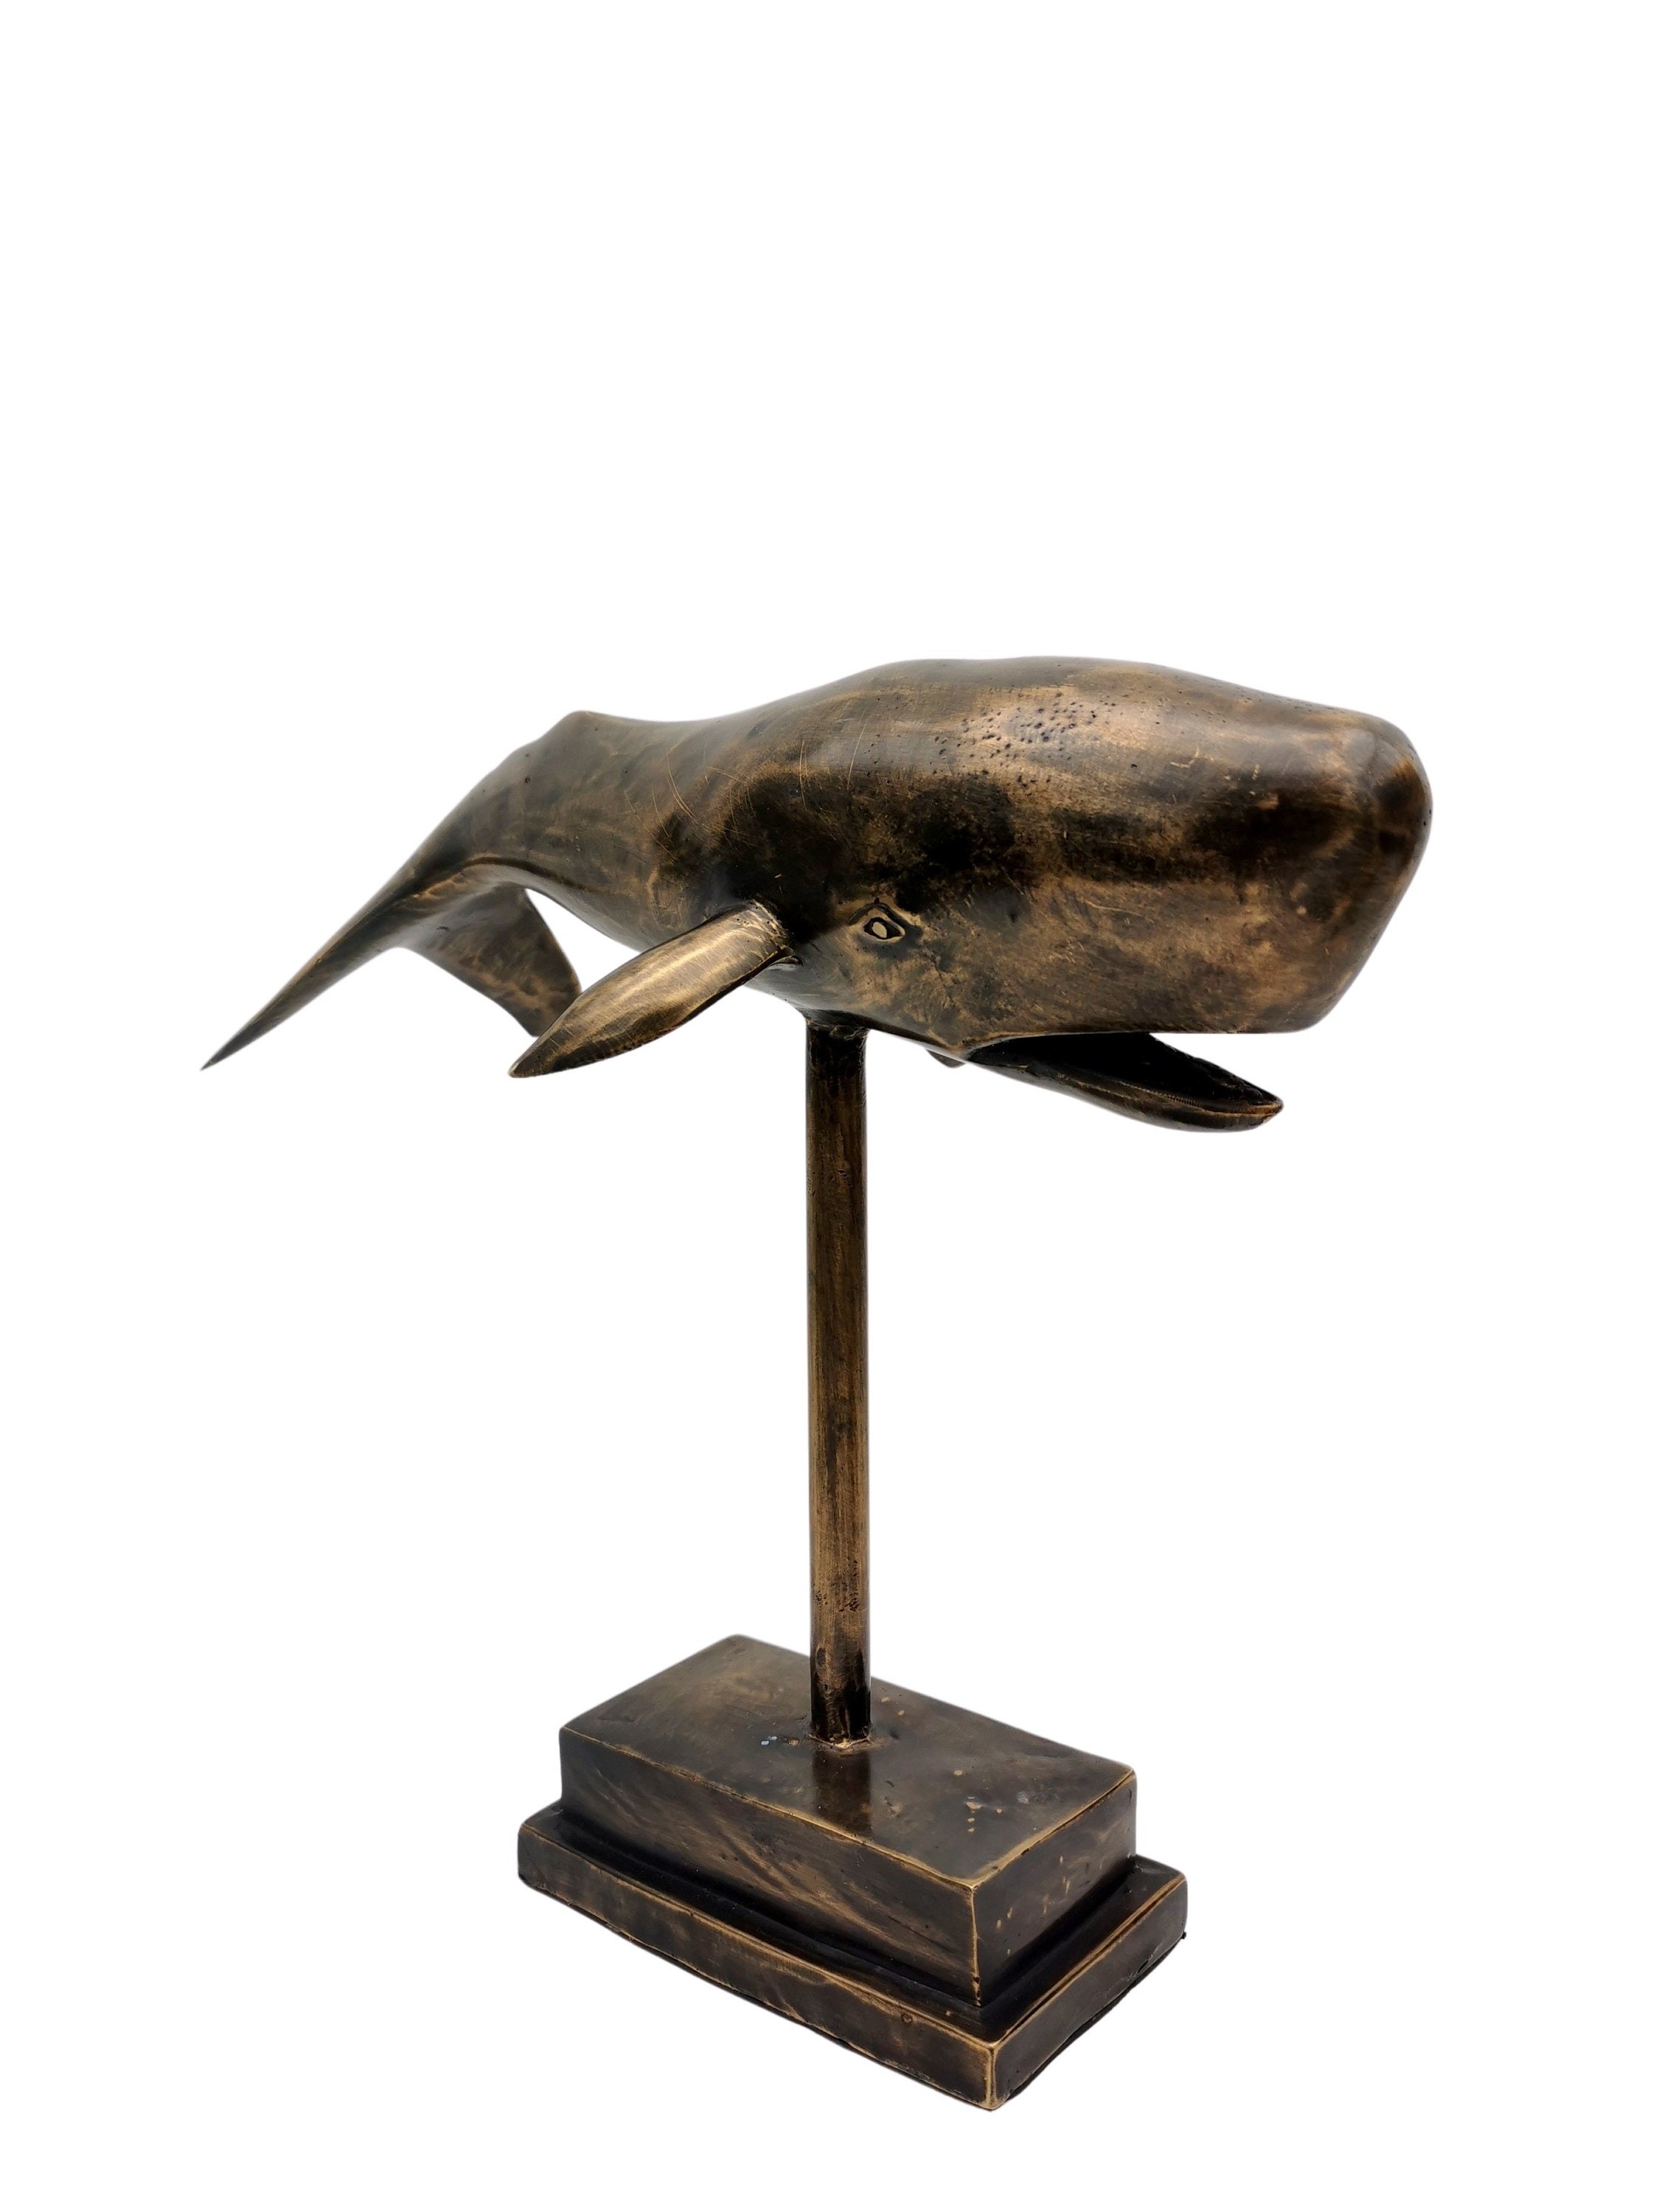 Sperm whale on stand - Bronze - Decorative sculpture of a swimming whale